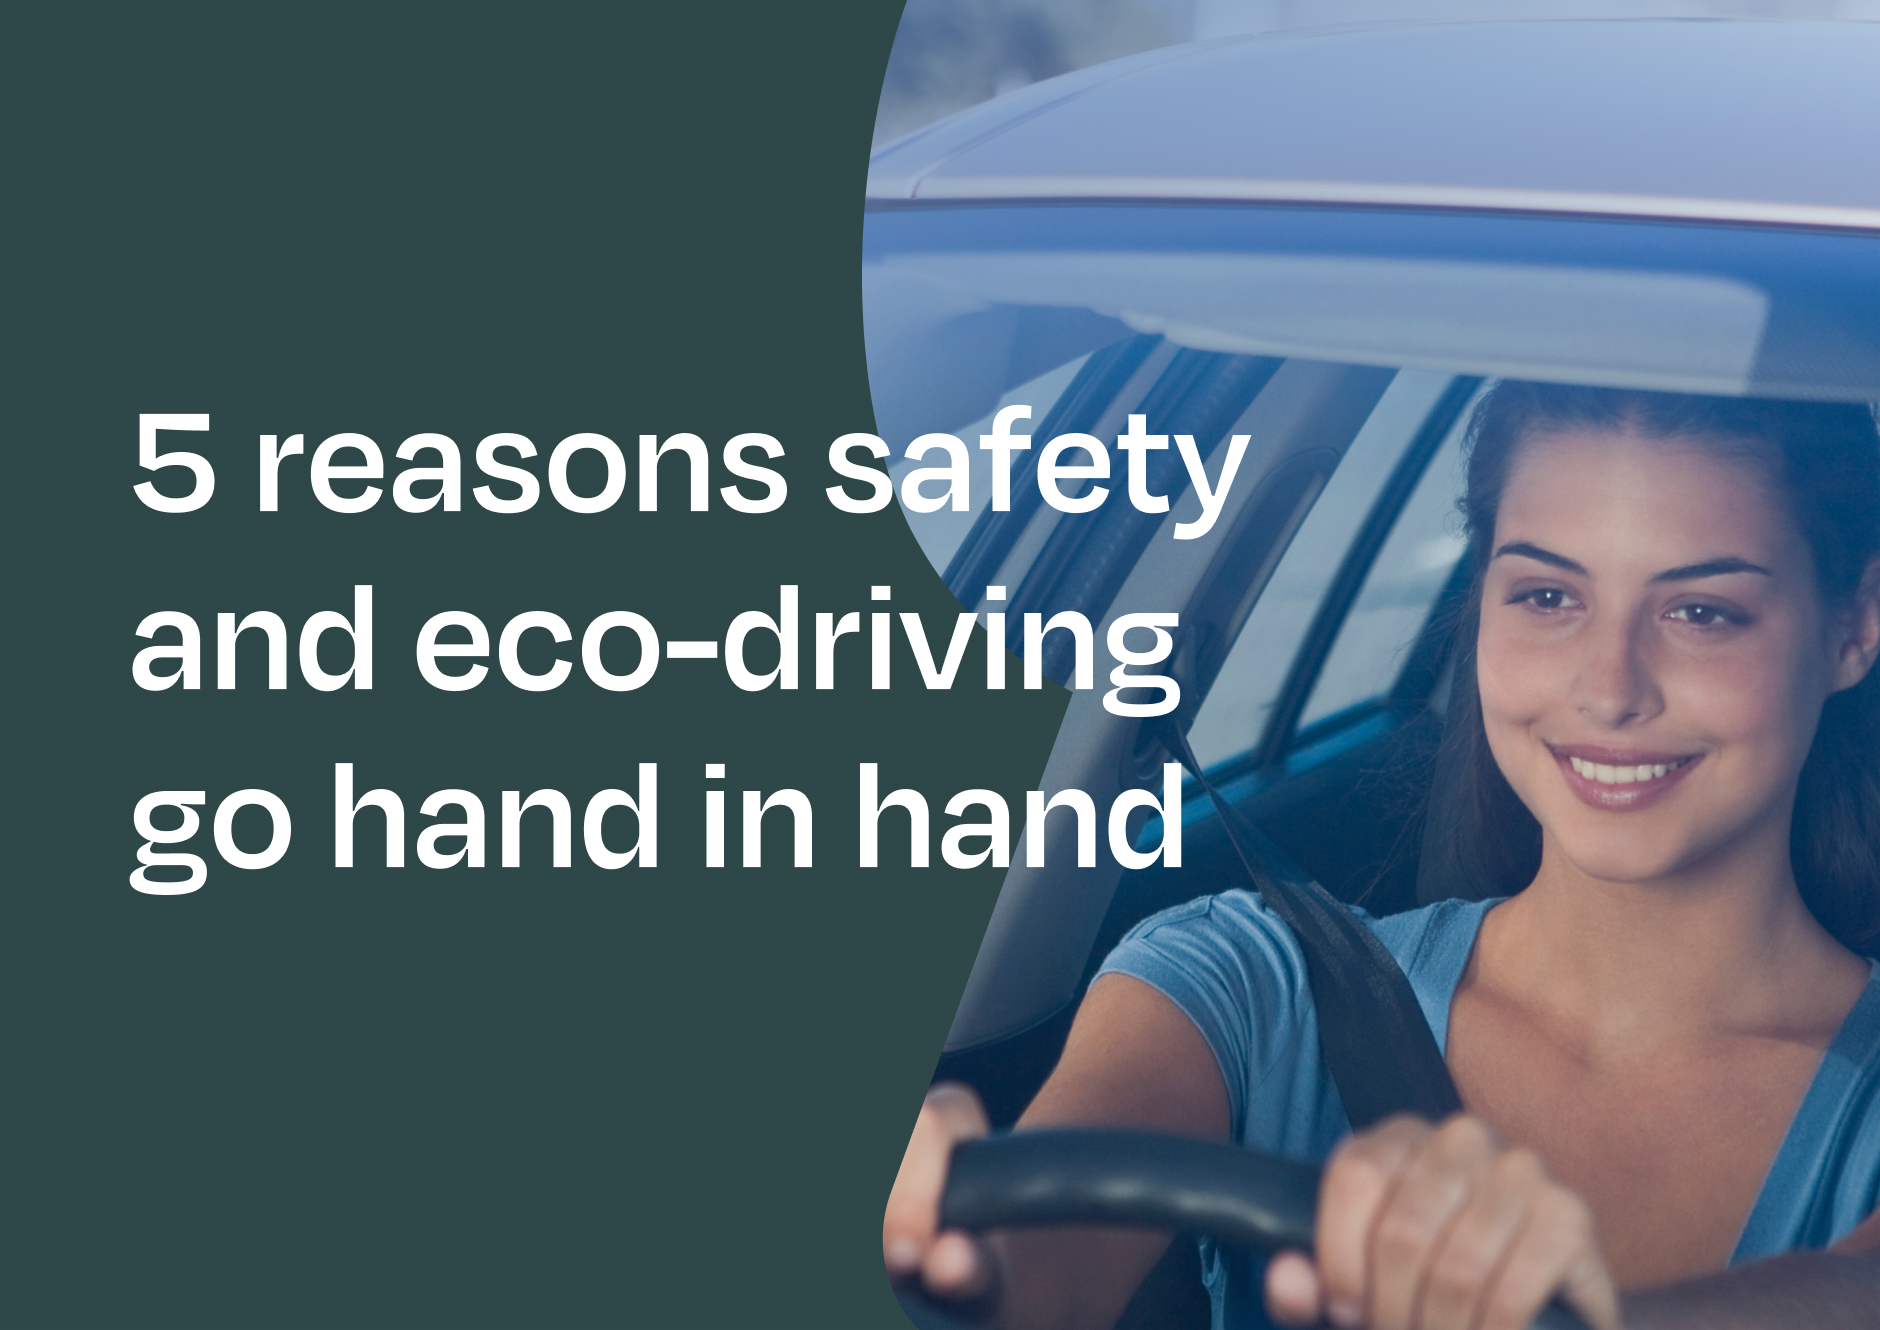 Driver safety and eco-driving are intrinsically linked and encouraging drivers to adopt smarter behaviors helps to achieve safer, cleaner roads.